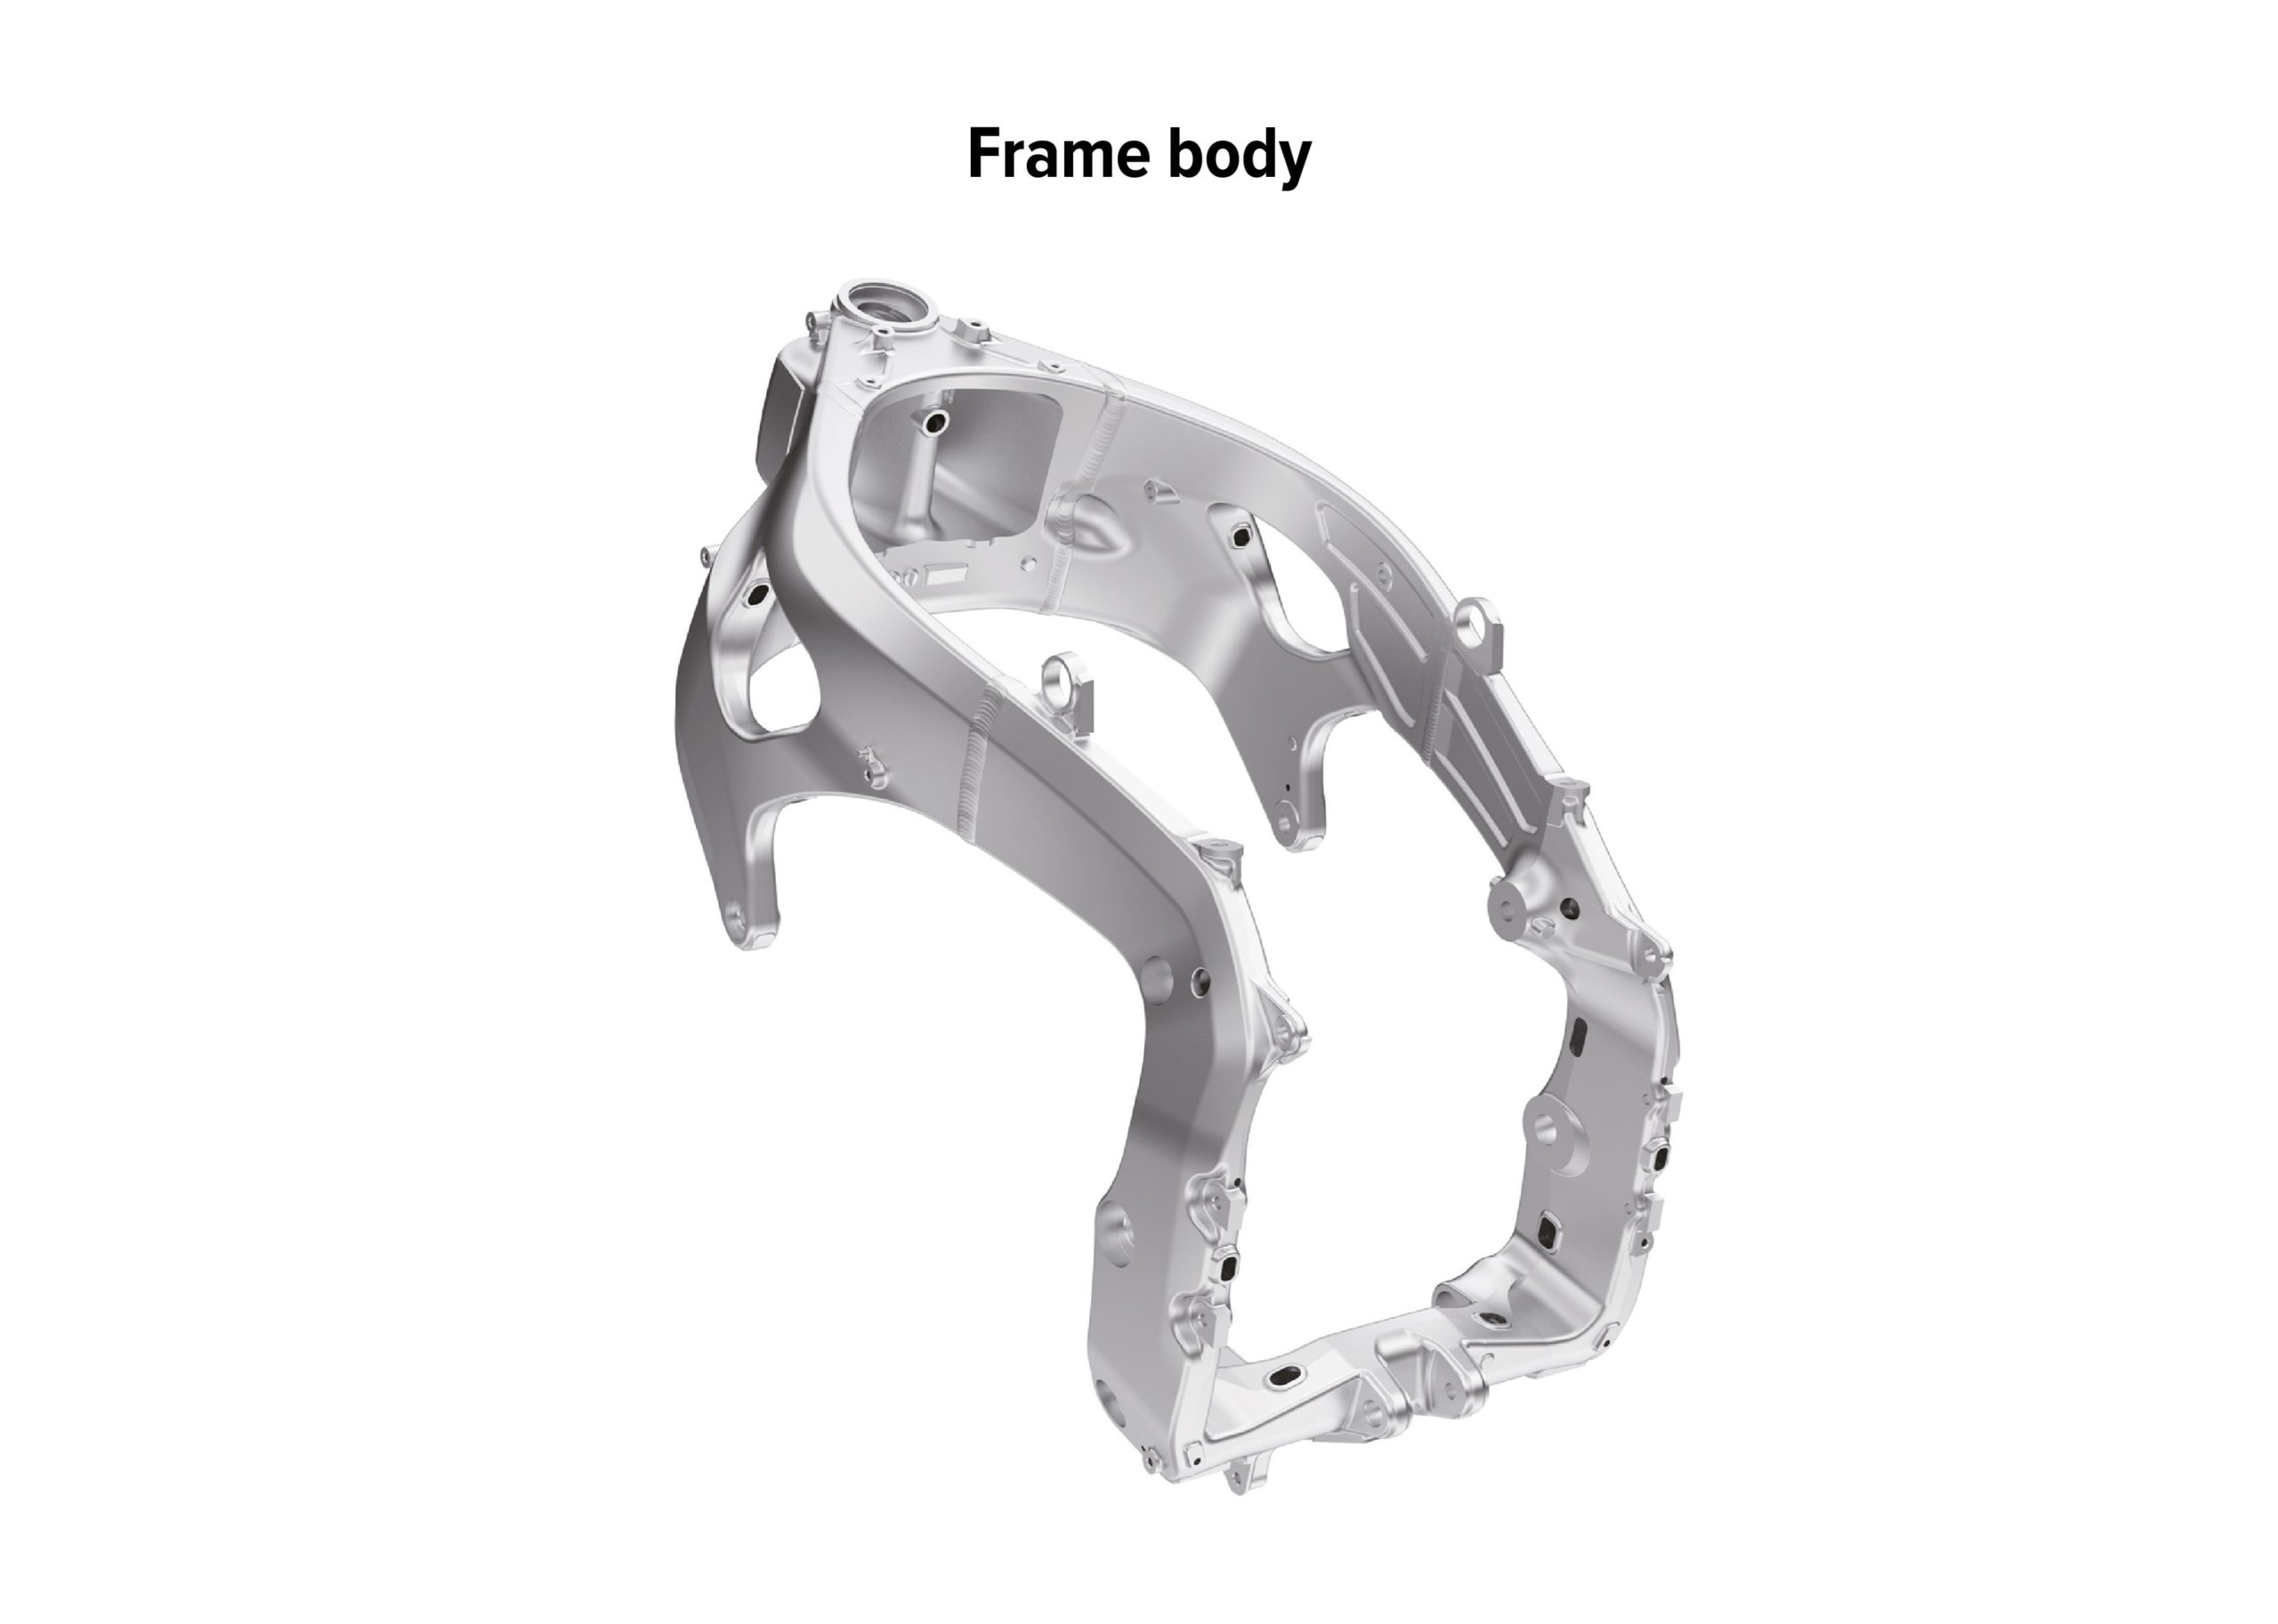 The frame of the CBR1000R.